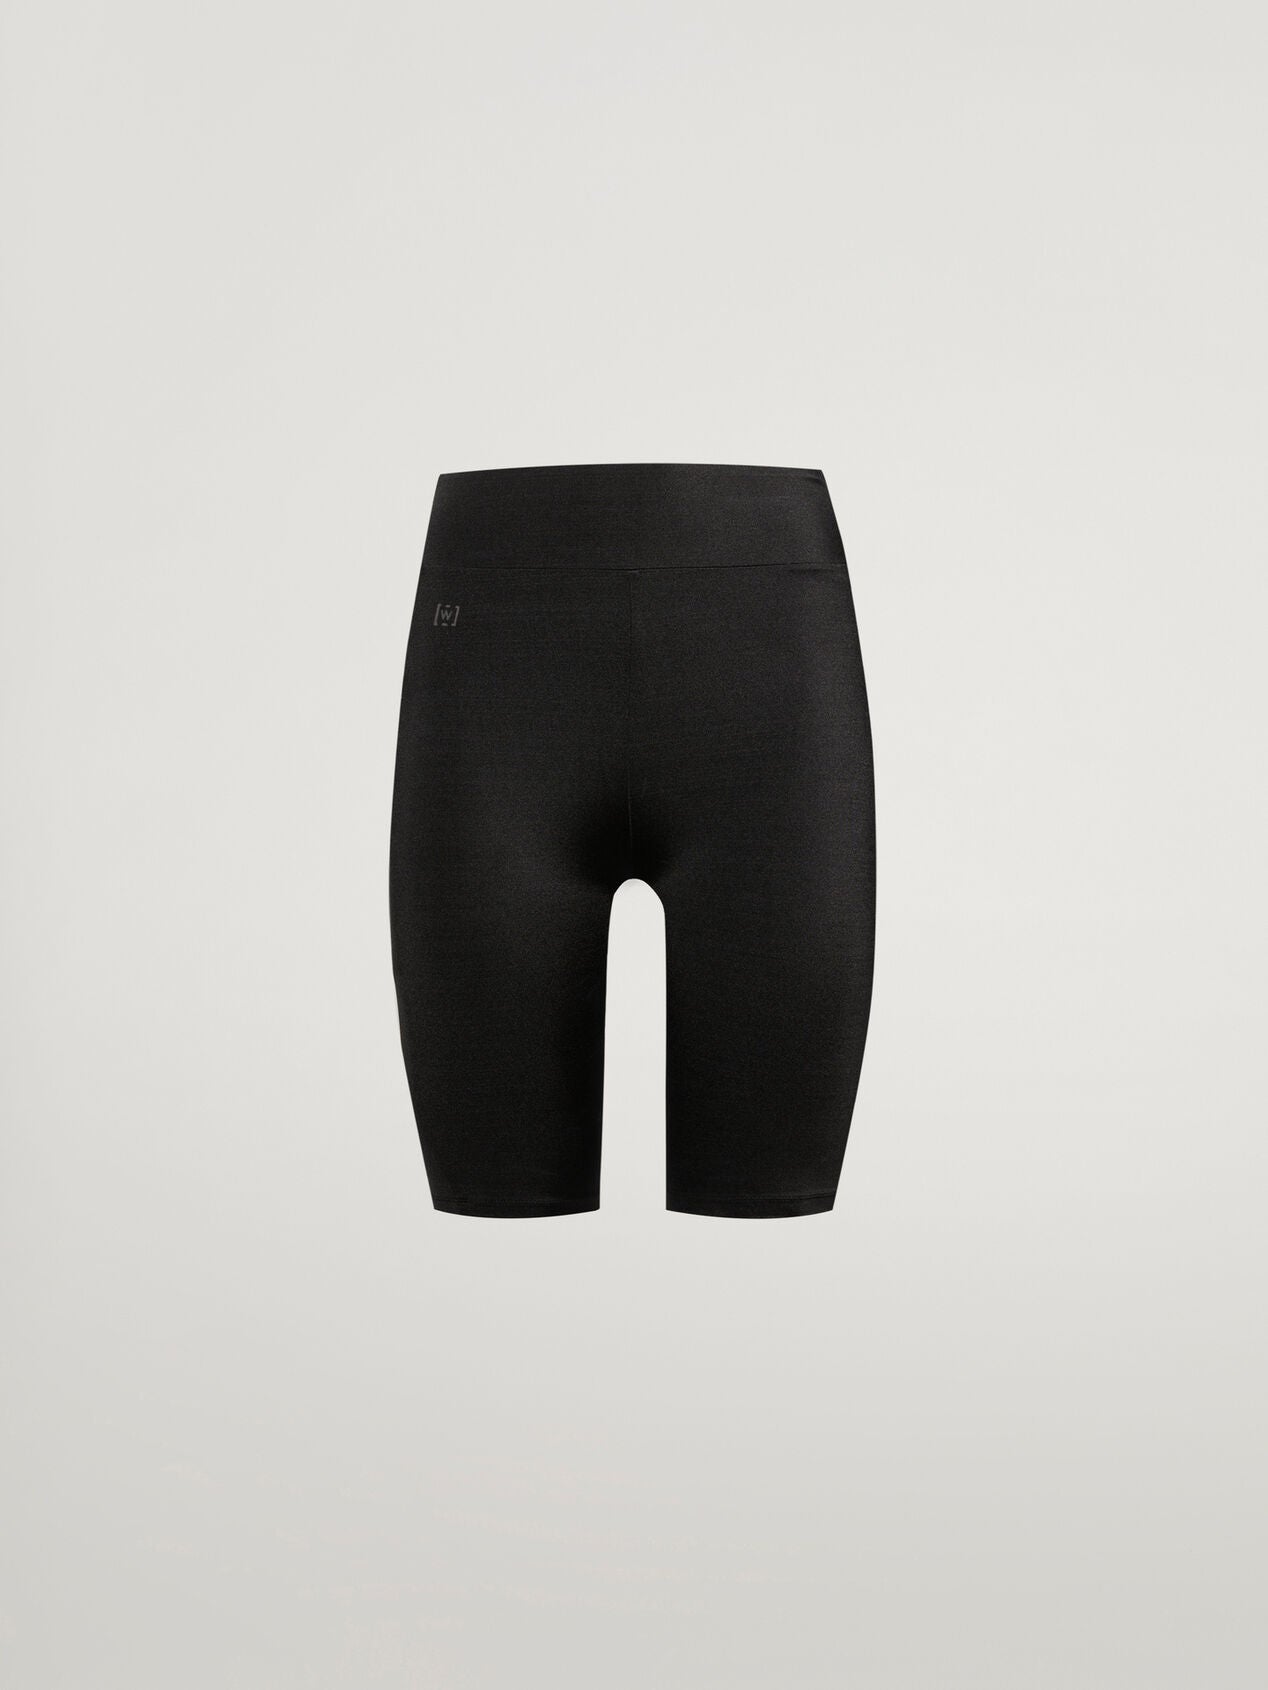 Wolford The Workout Biker Black